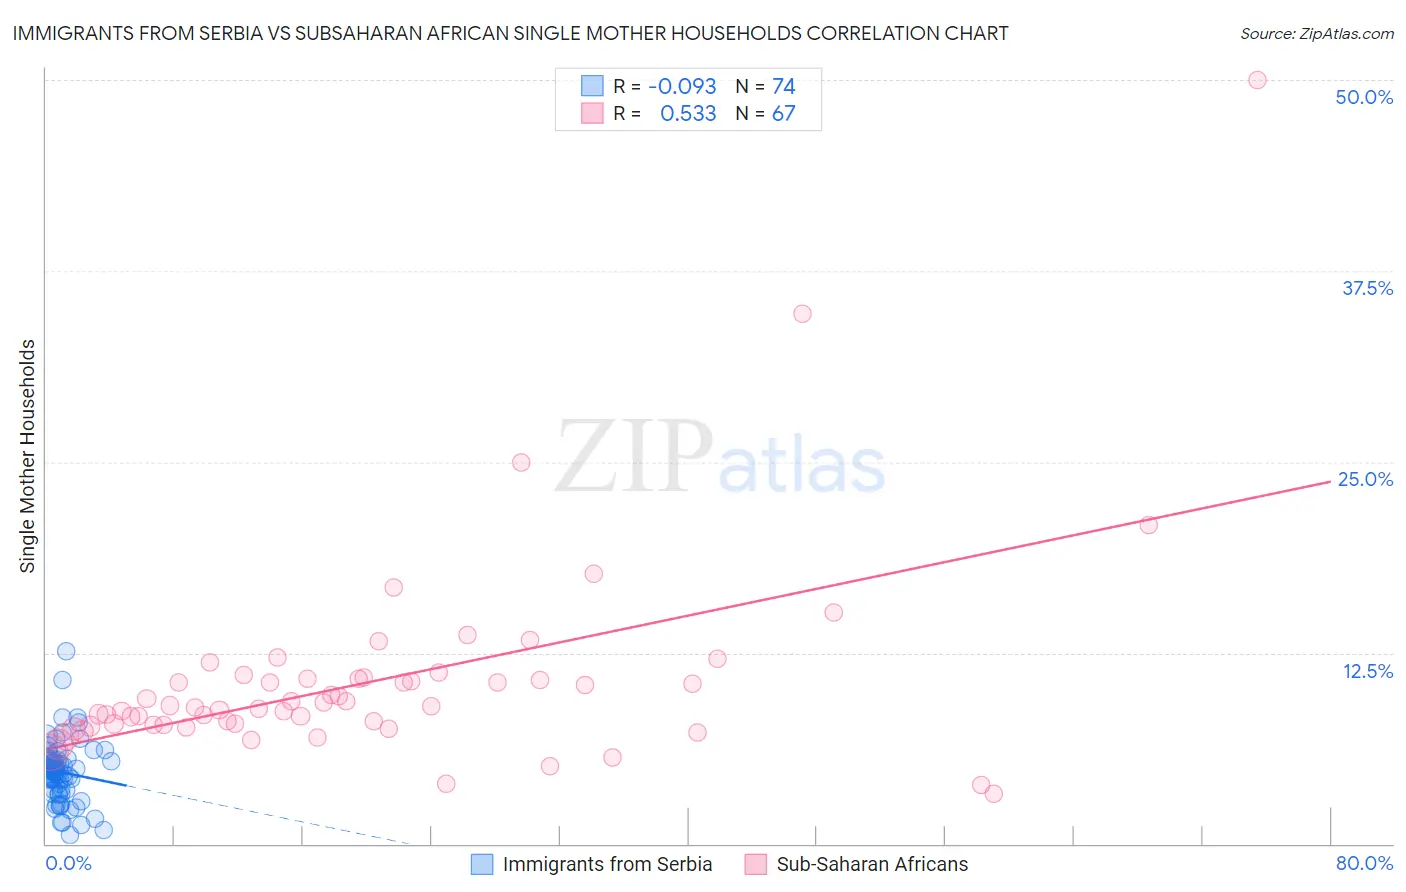 Immigrants from Serbia vs Subsaharan African Single Mother Households